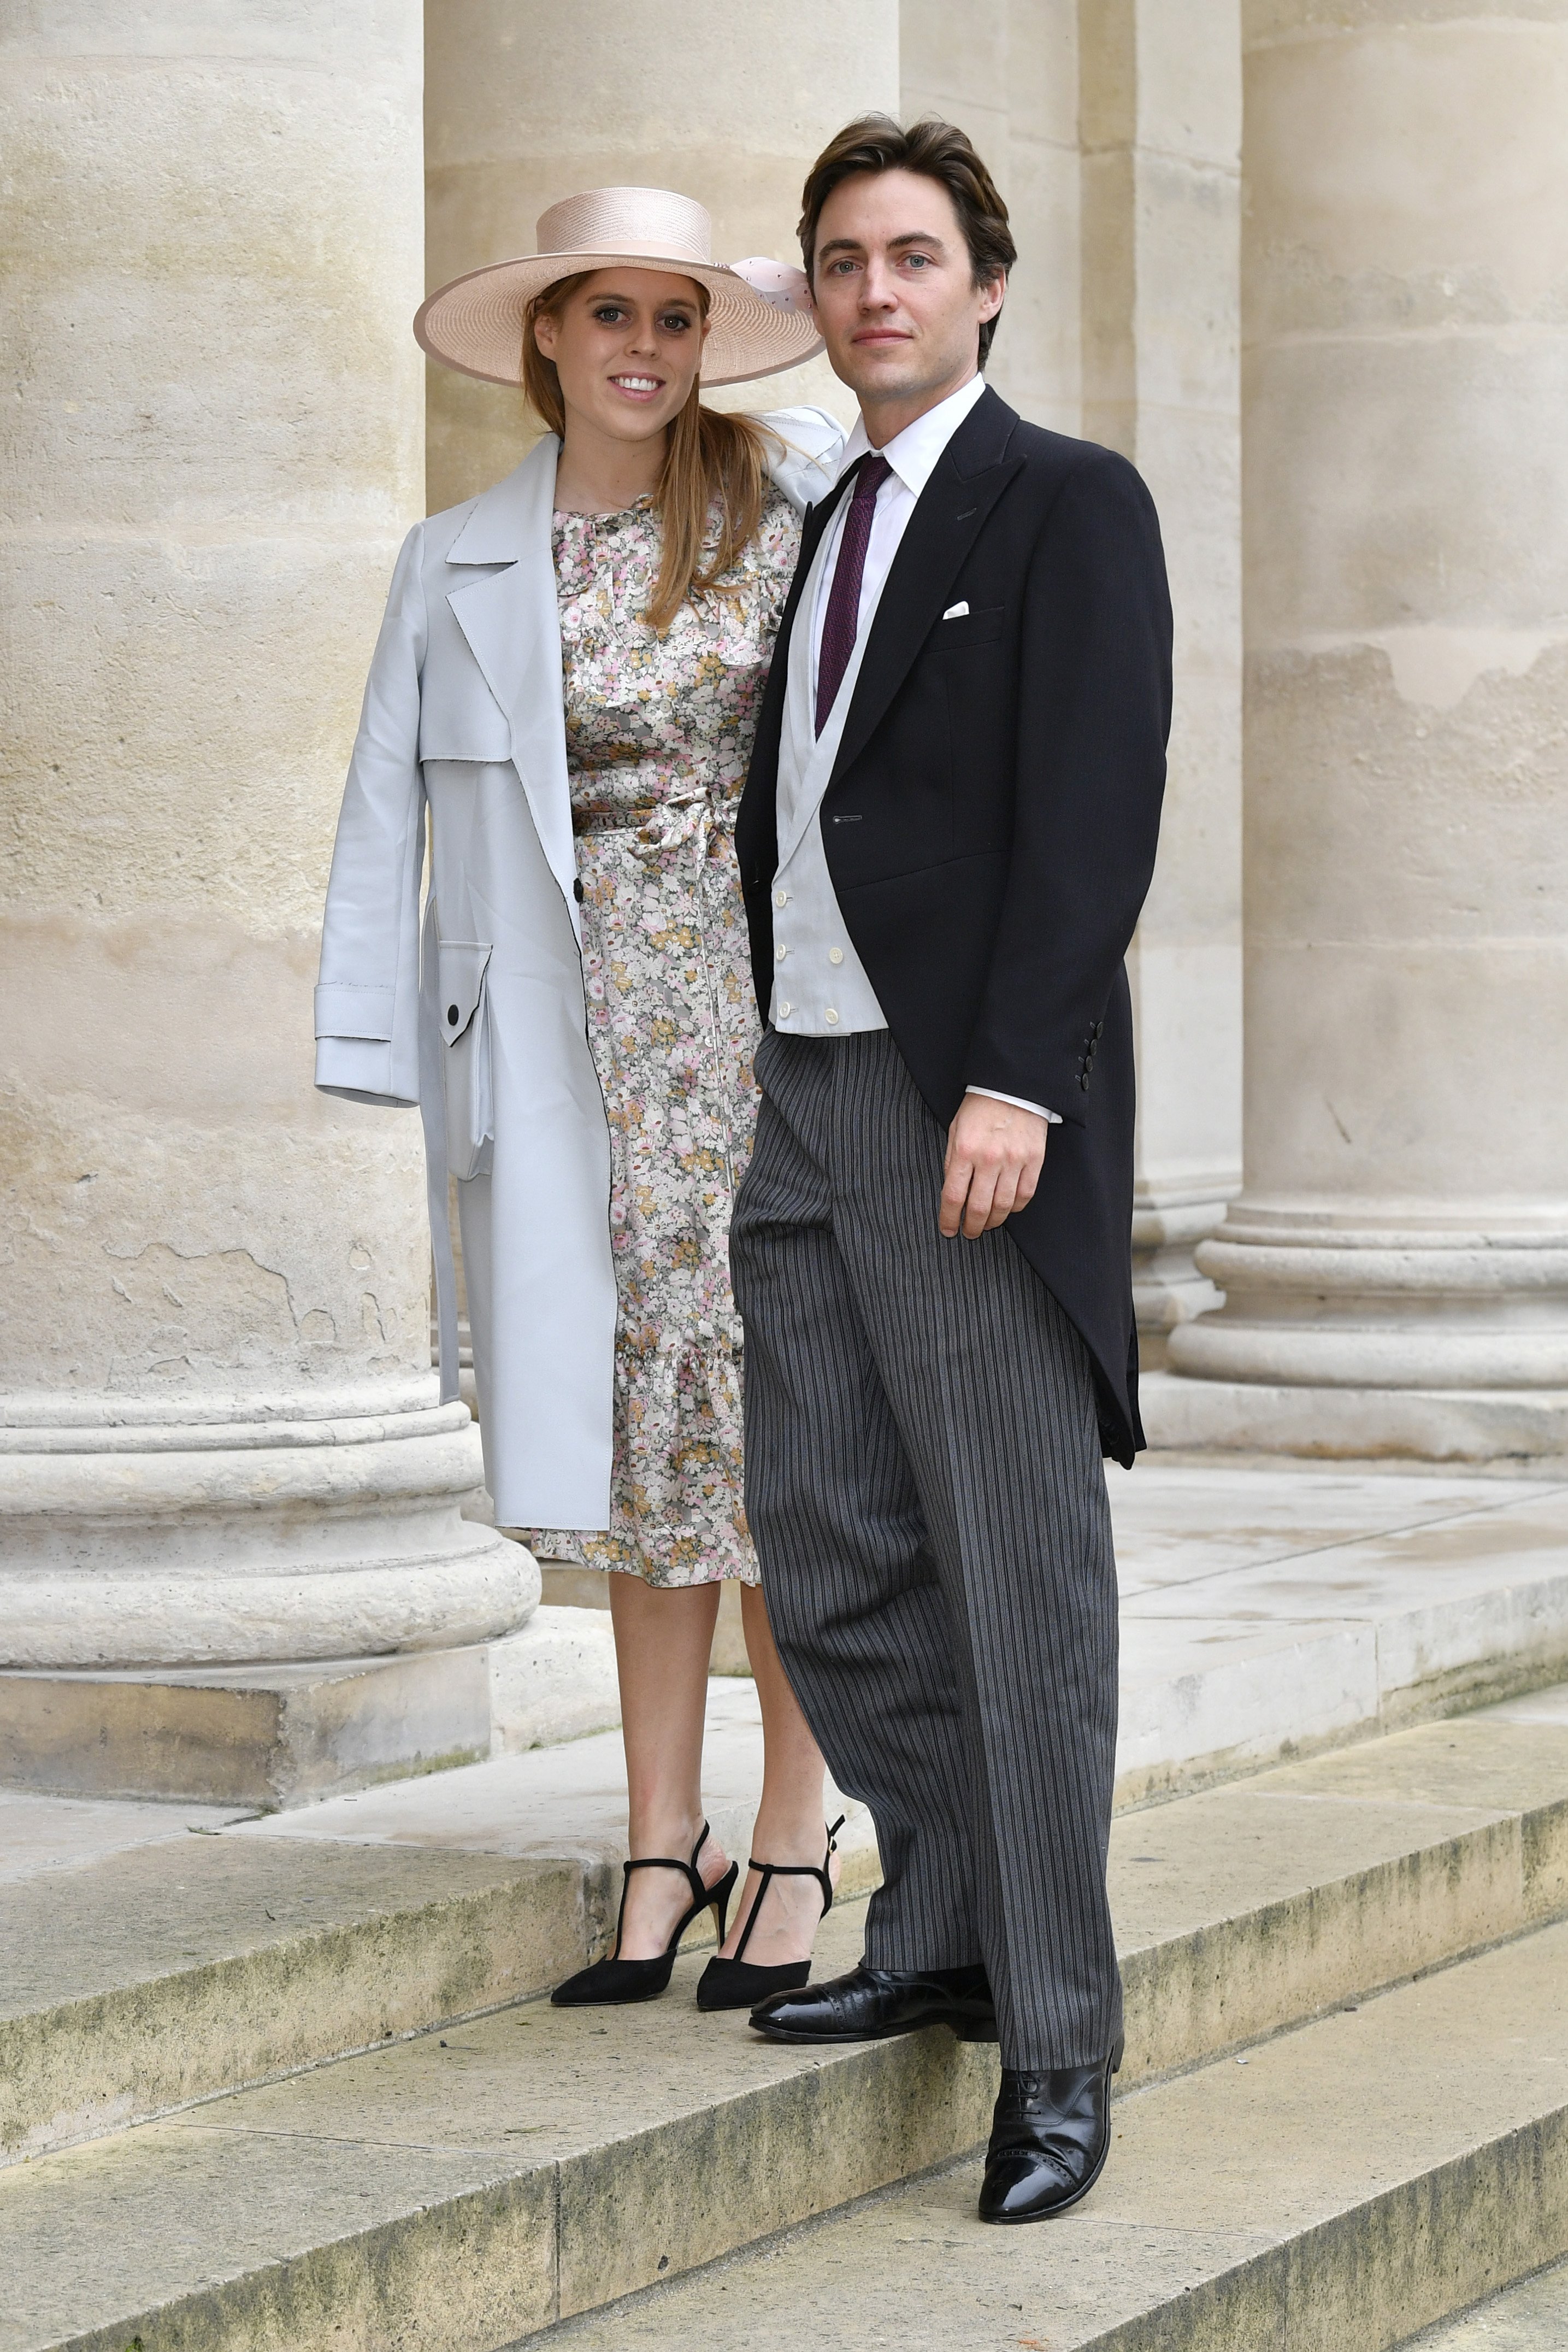 Princess Beatrice and her fiance Edoardo Mapelli Mozzi during the wedding of Prince Jean-Christophe Napoleon and Olympia Von Arco-Zinneberg at Les Invalides on October 19, 2019 in Paris, France. / Source: Getty Images